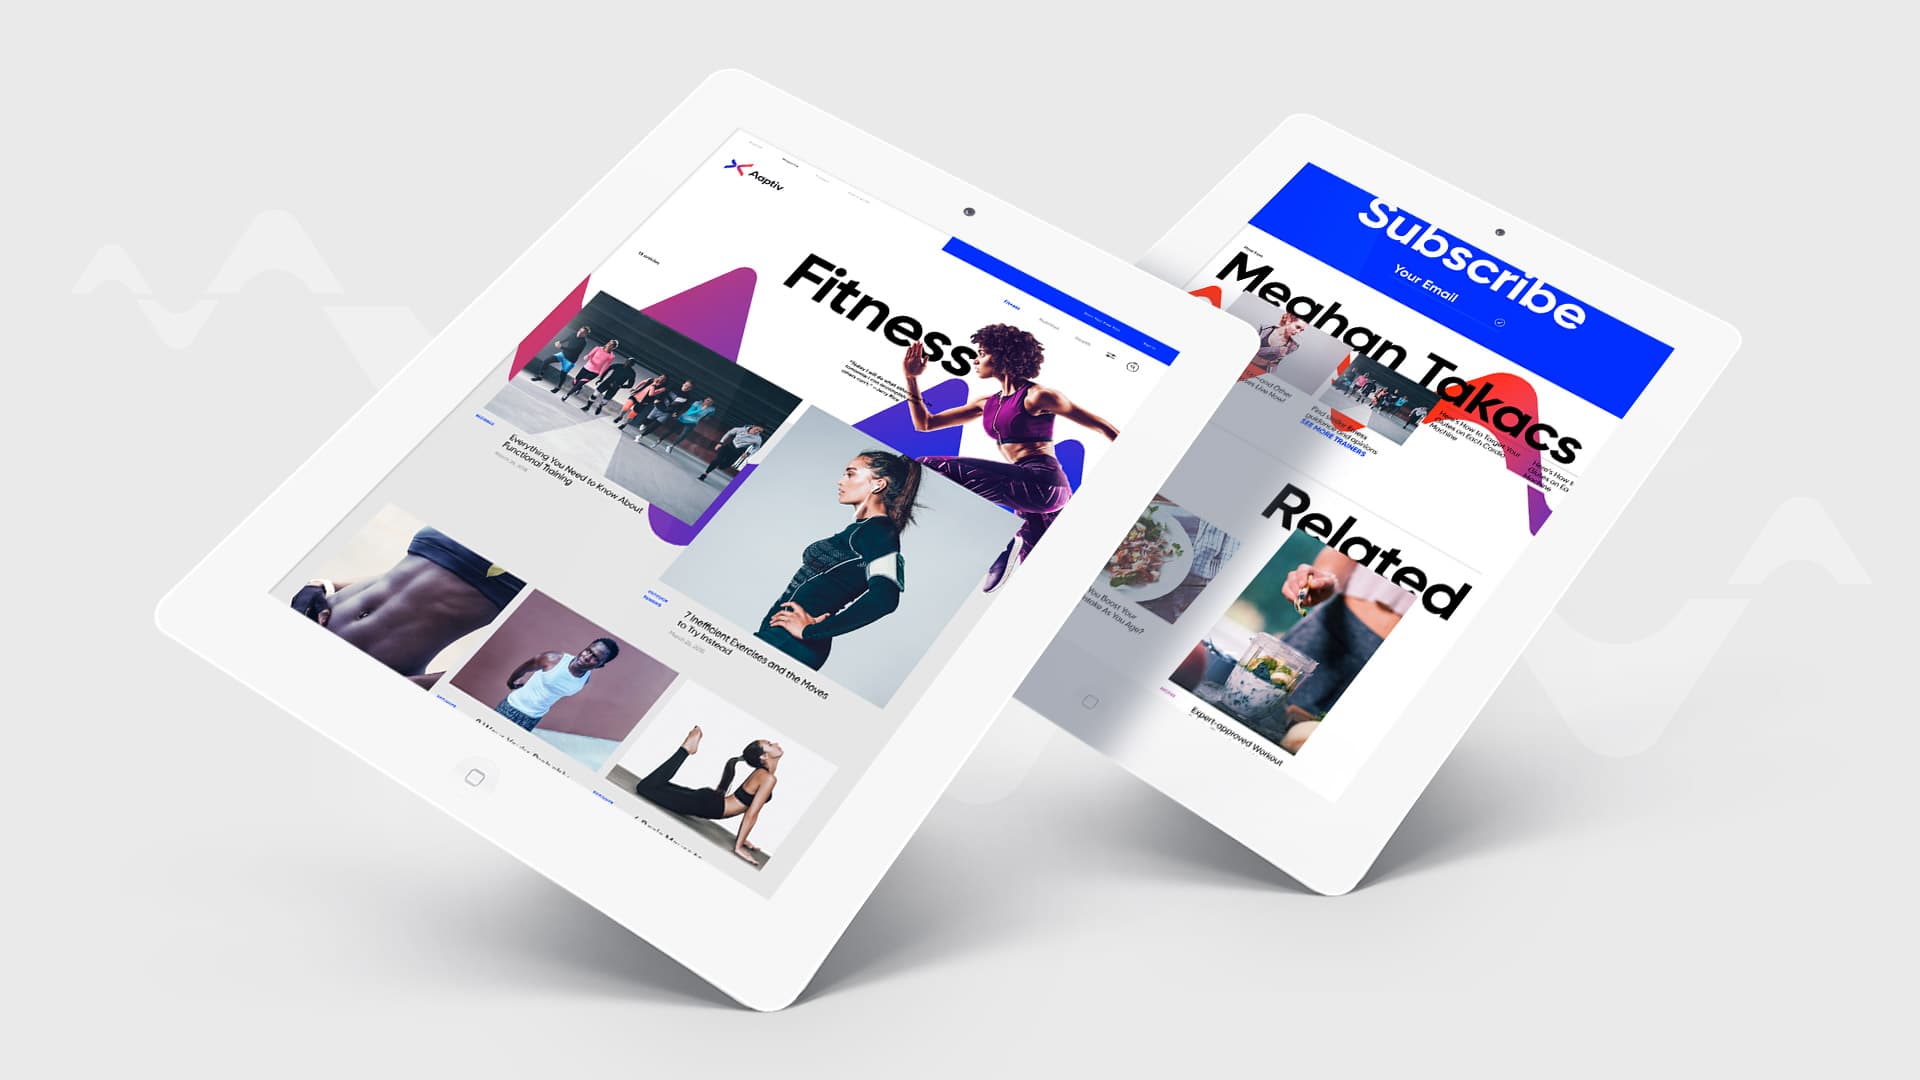 crafted-transformed-the-fitness-app-aaptiv-for-a-better-experience-mobile-app